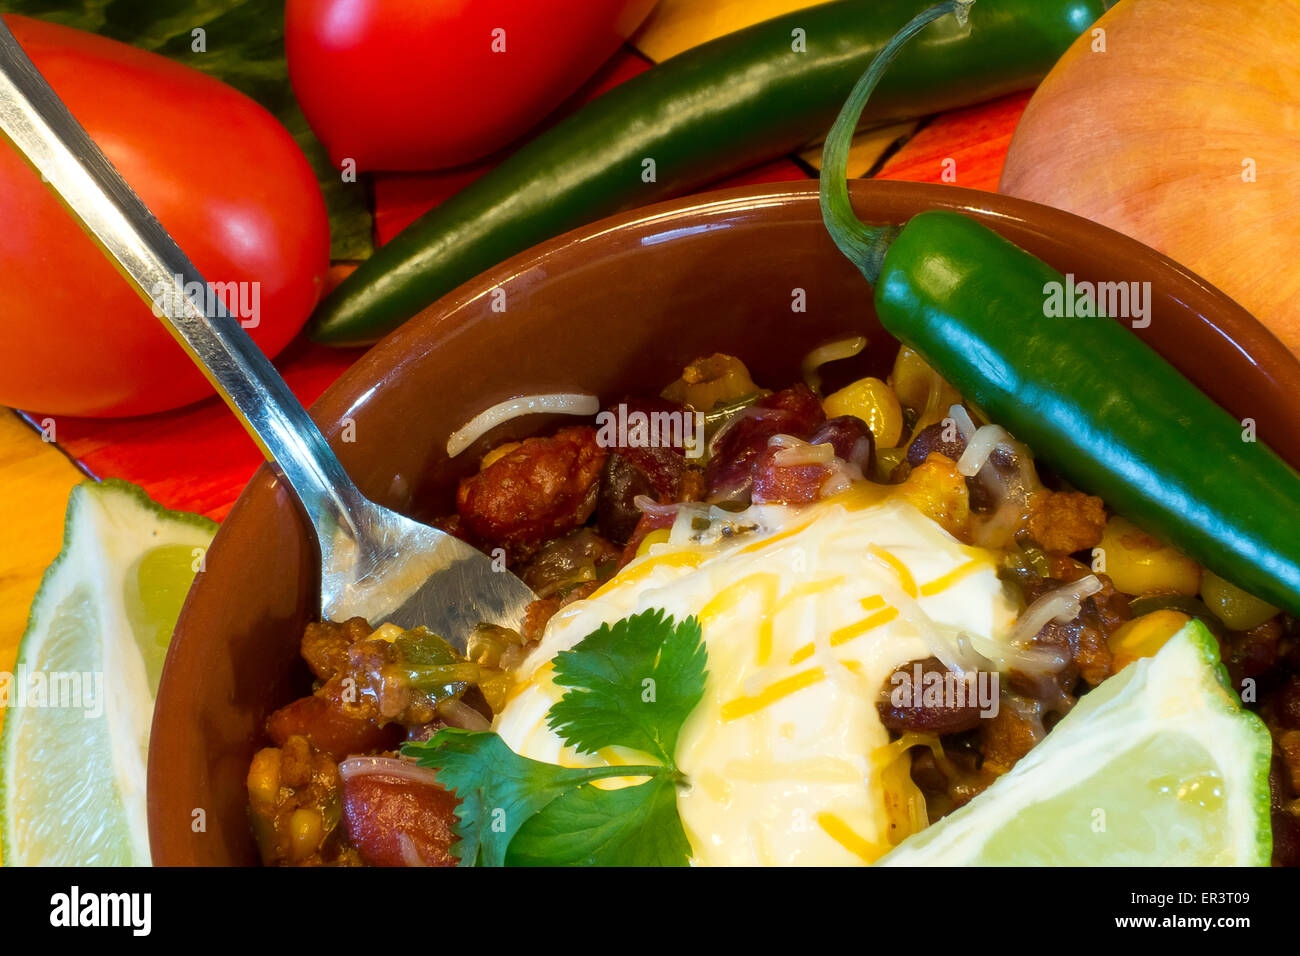 Hot and spicy Chili con carne garnished with cilantro and topped with sour cream Stock Photo